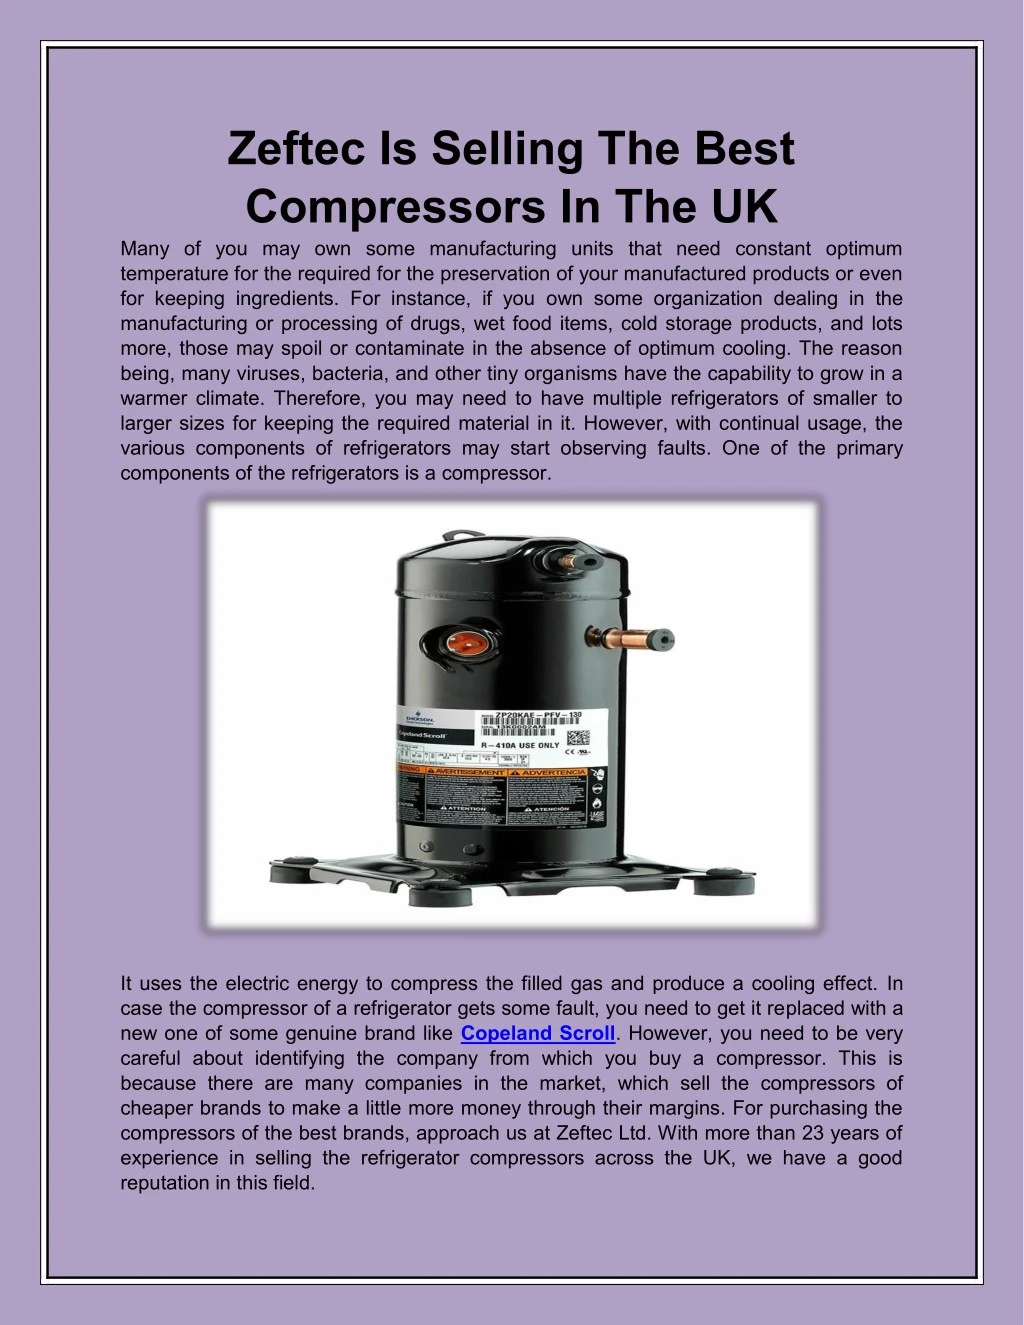 zeftec is selling the best compressors